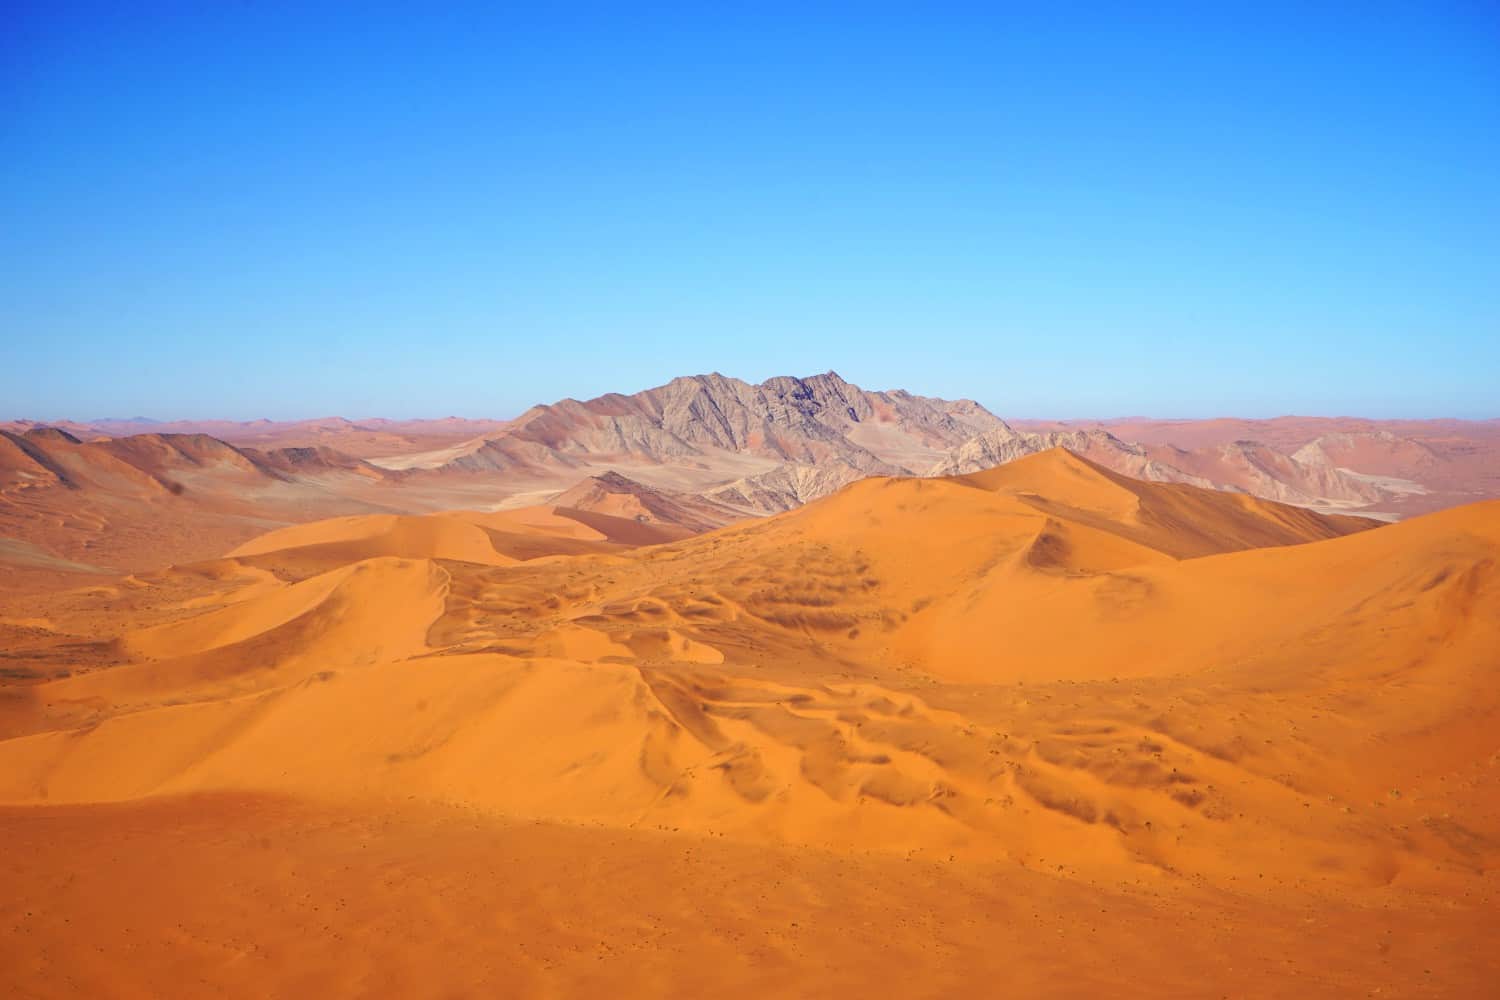 Views of Sossusvlei from above